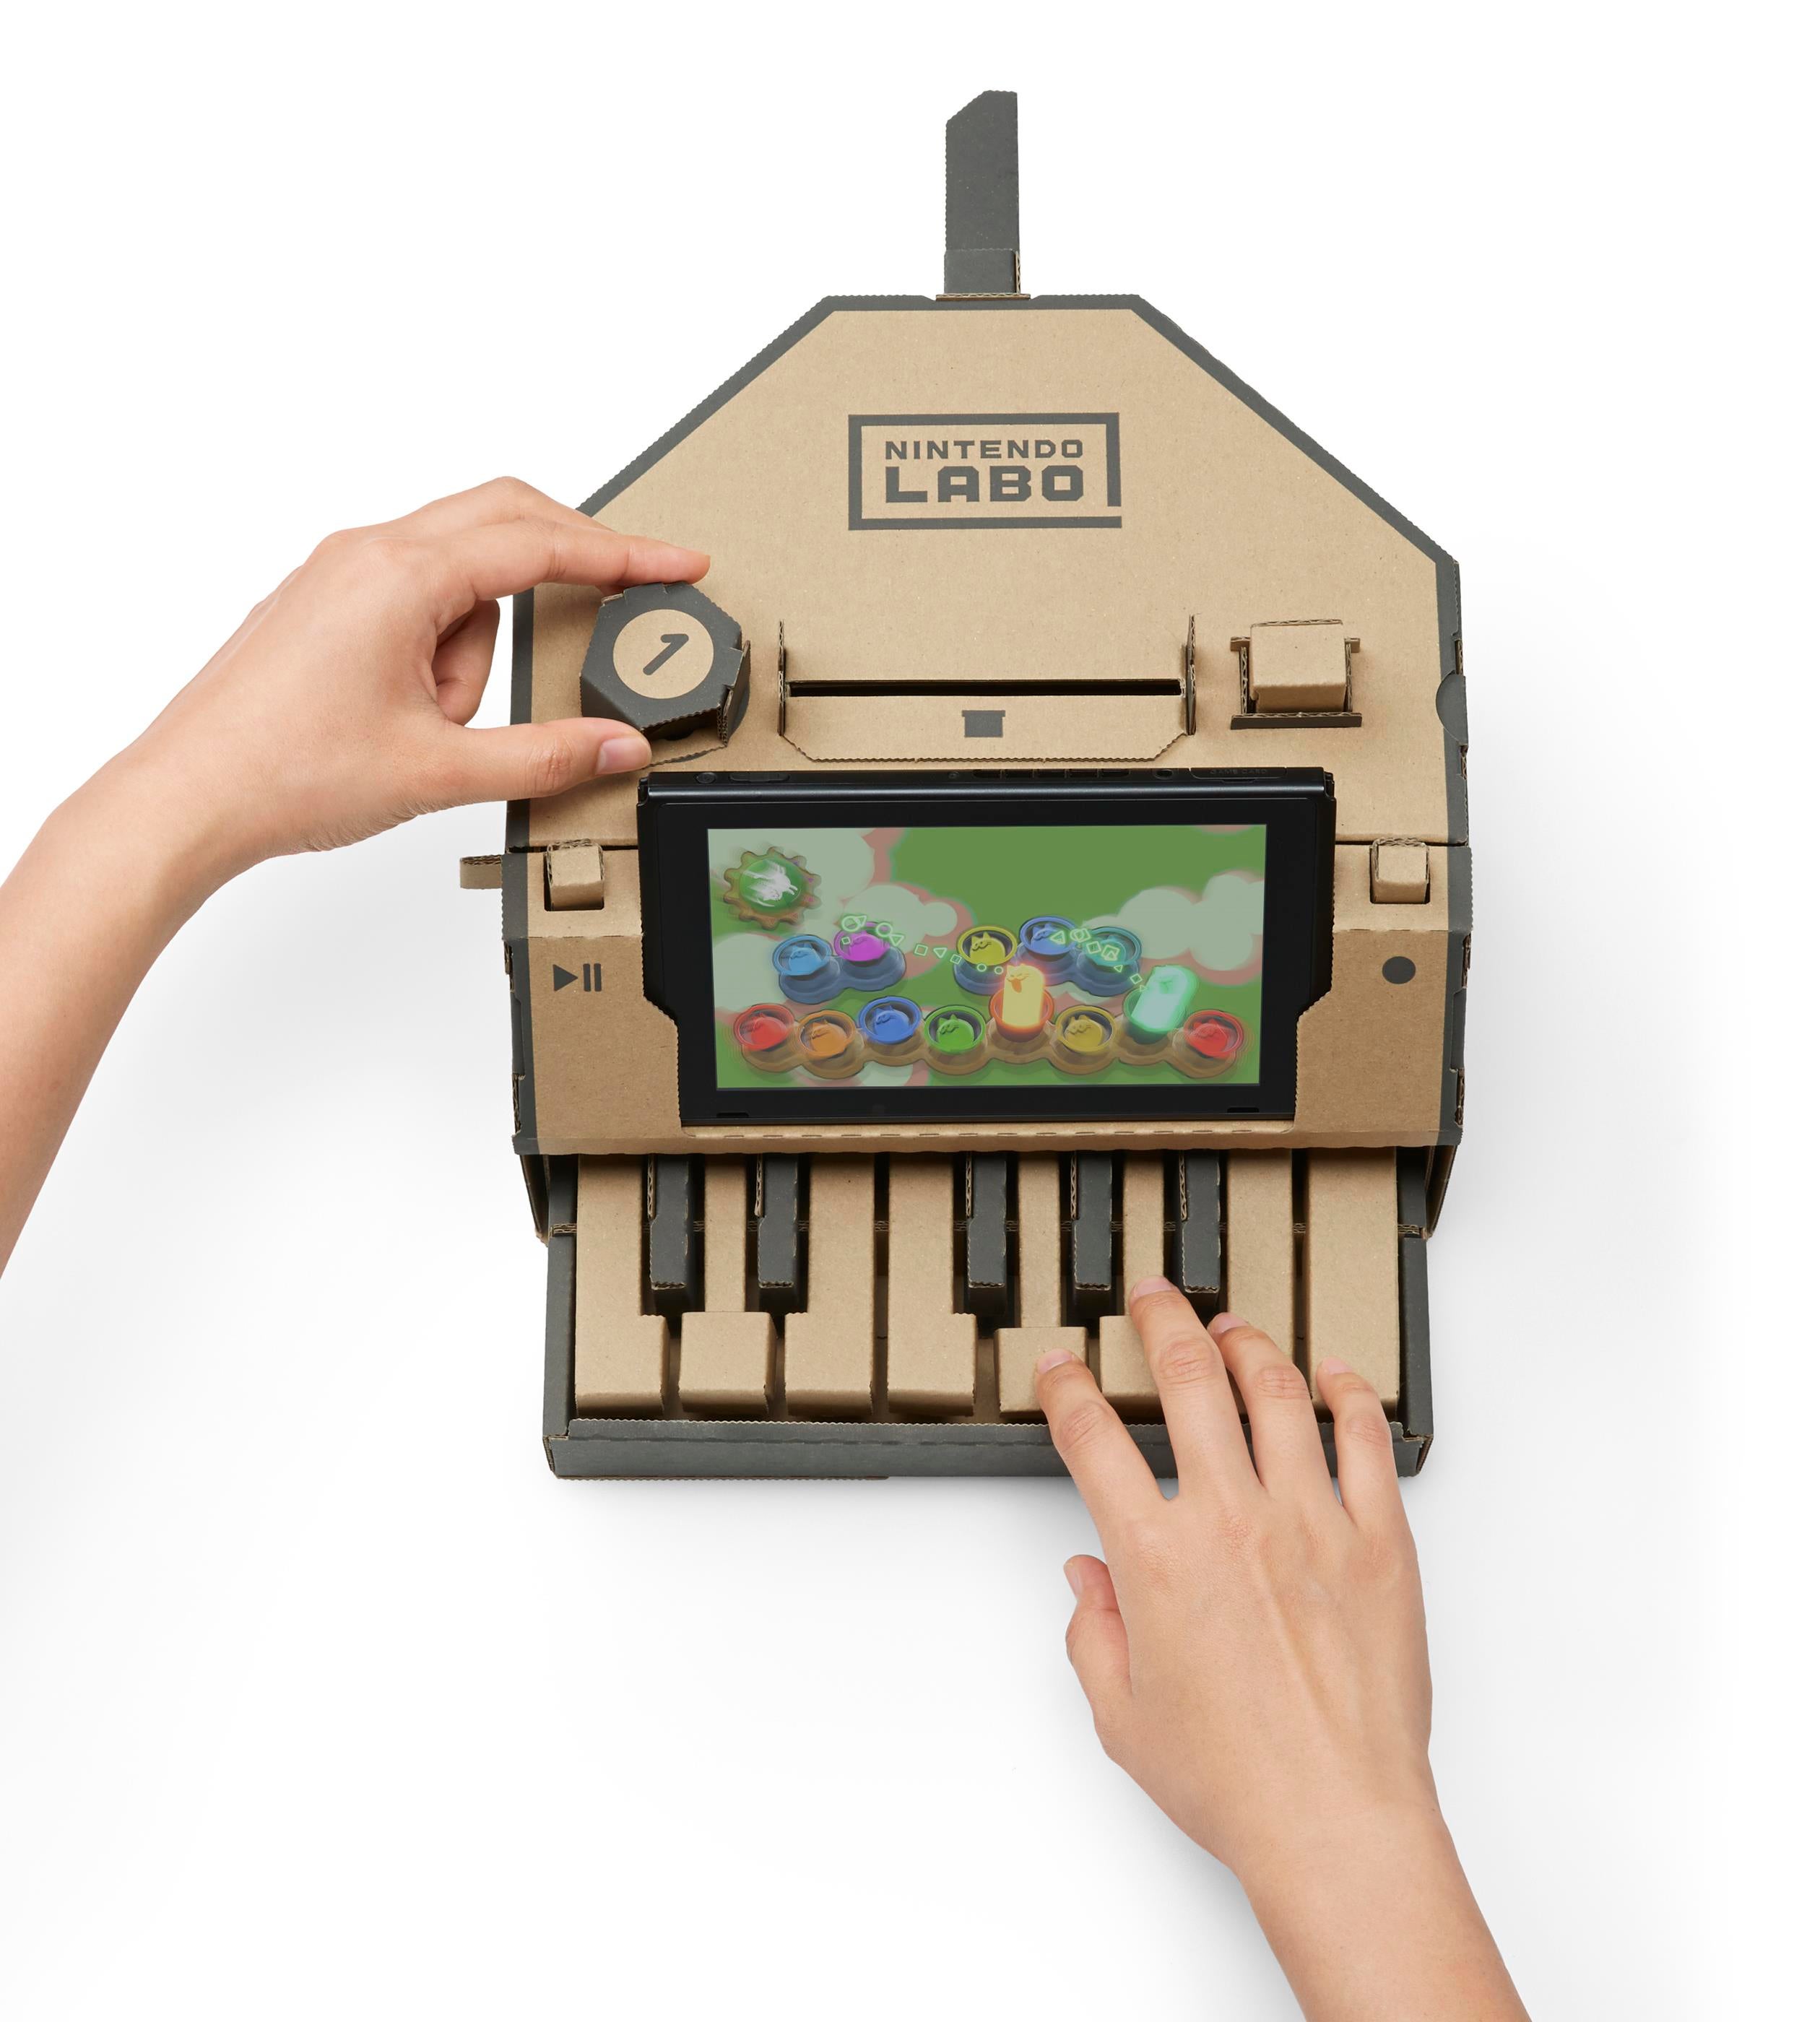 Image for Nintendo Labo: here's every good, bad and asshole opinion about Nintendo's new cardboard toys you'll see today